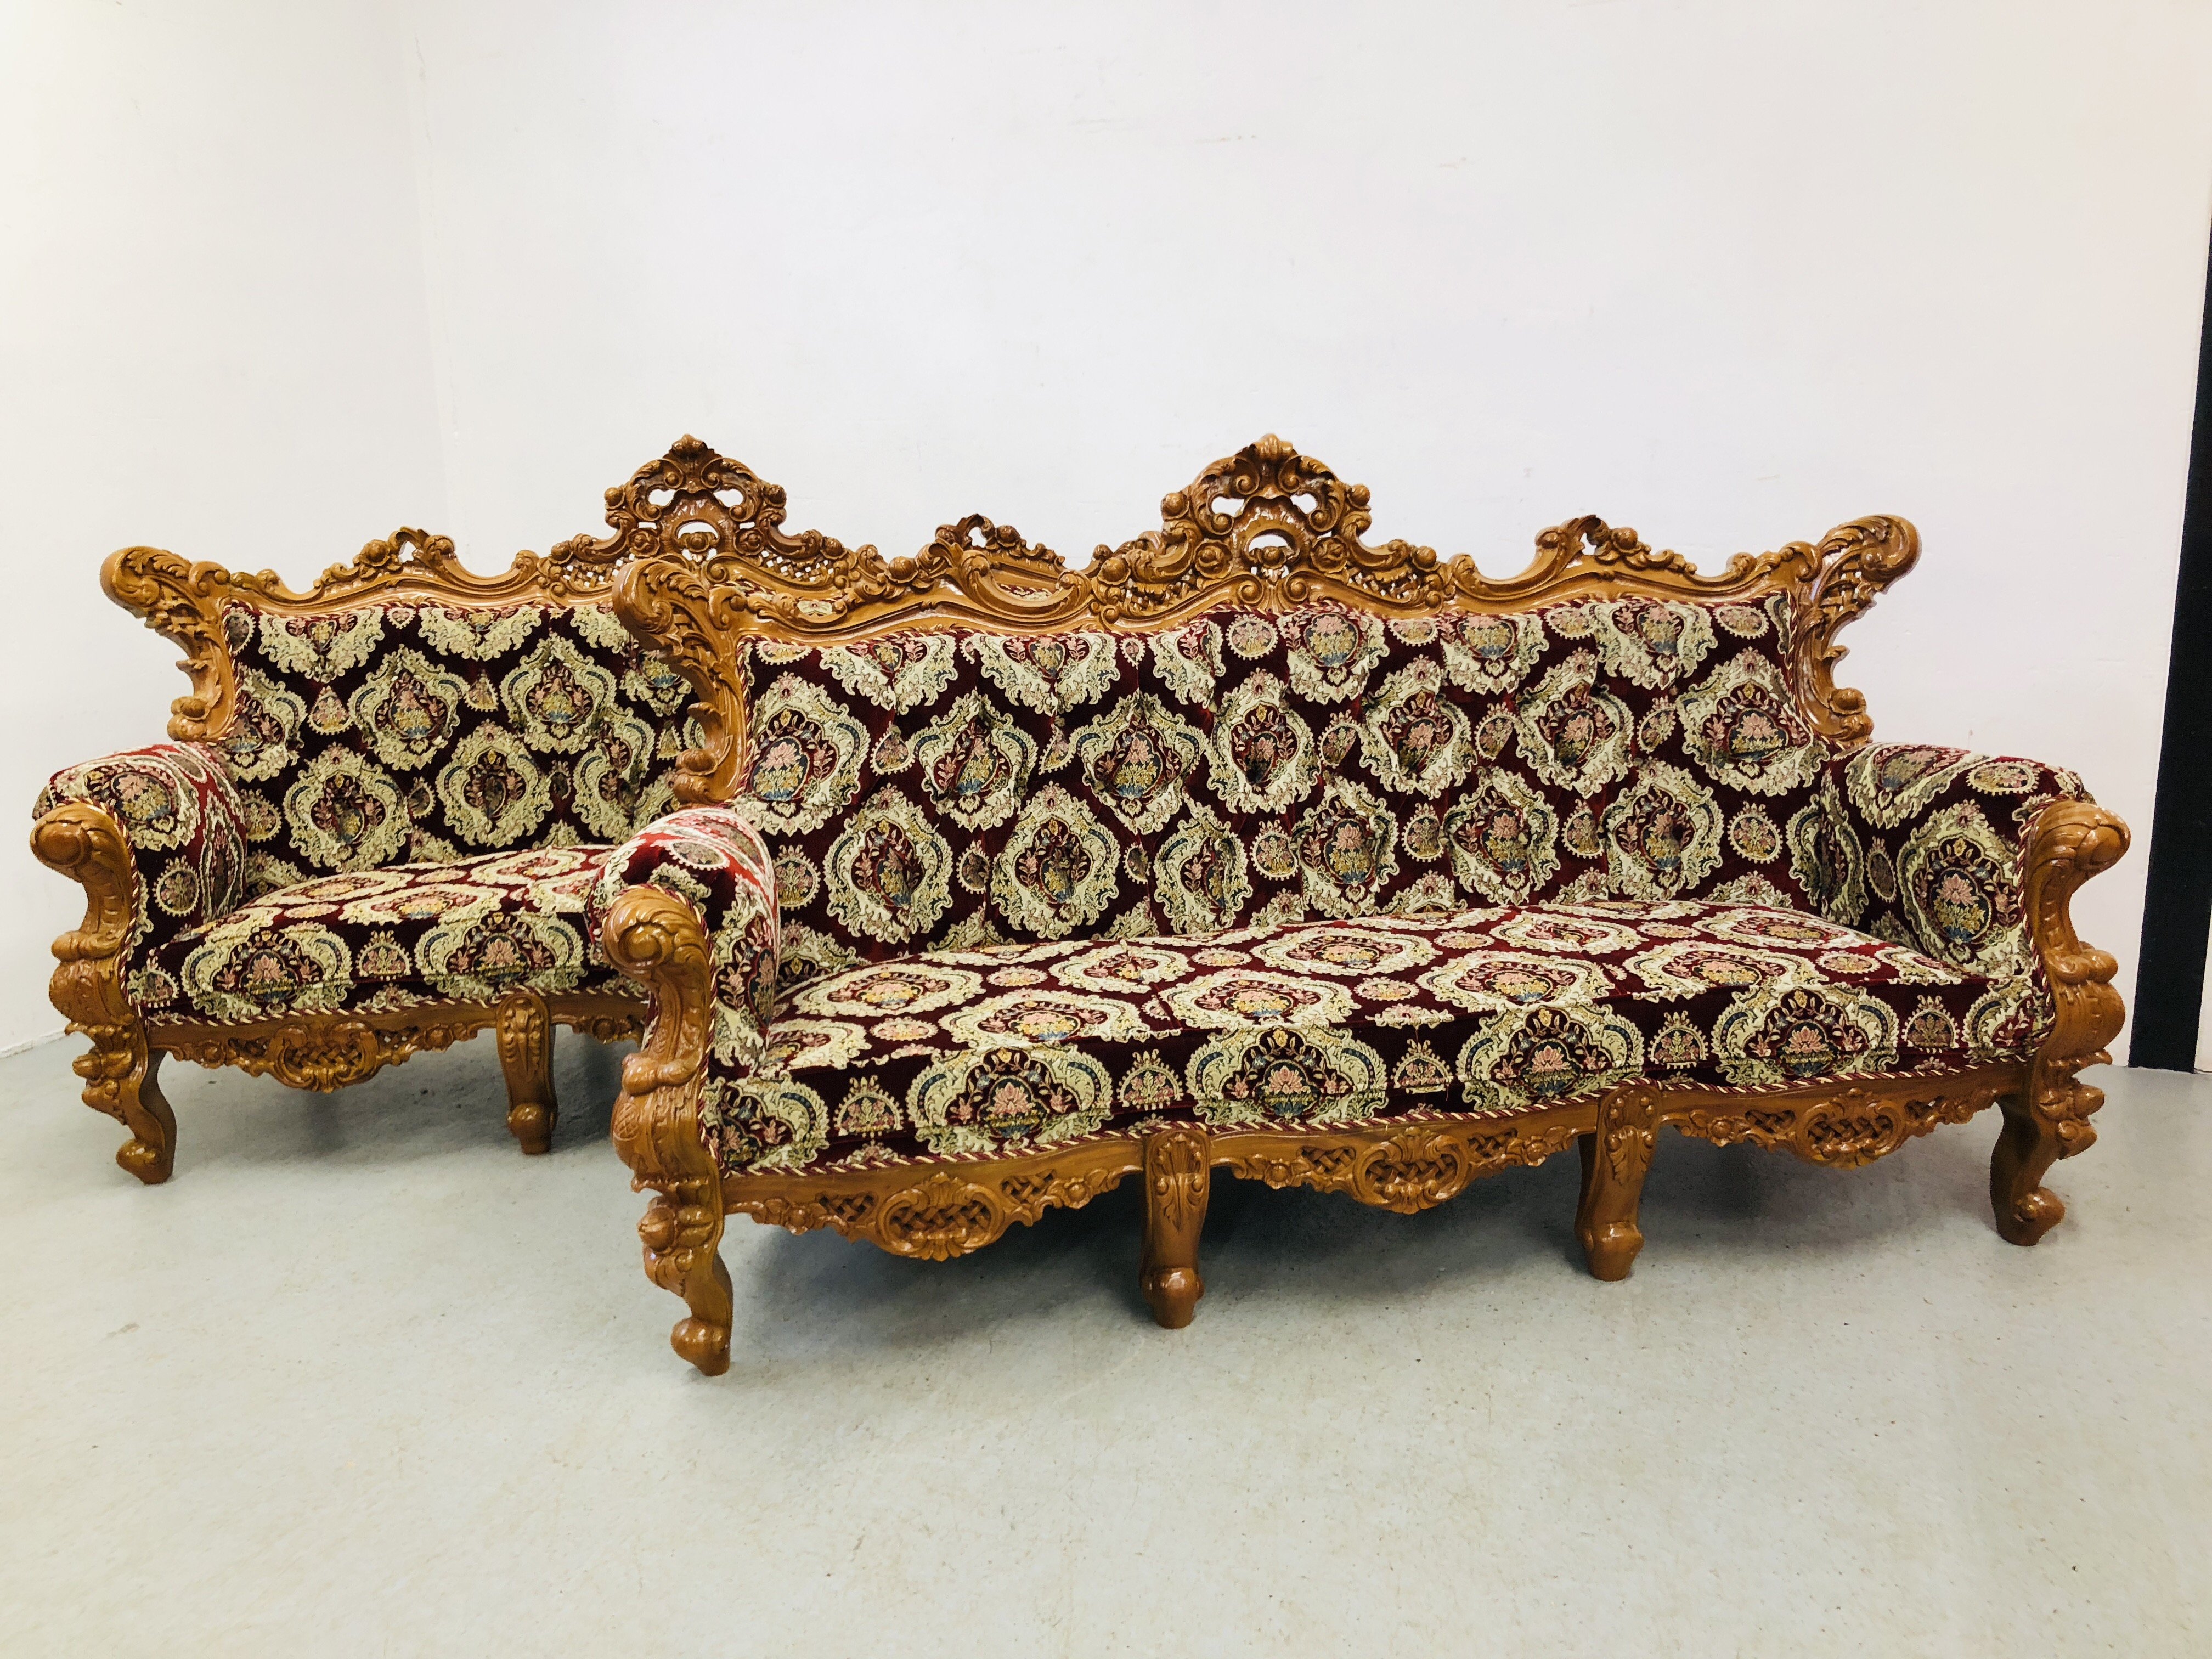 A PAIR OF HIGHLY DECORATIVE REPRODUCTION CONTINENTAL STYLE THREE SEATER COUCHES - NON COMPLIANT